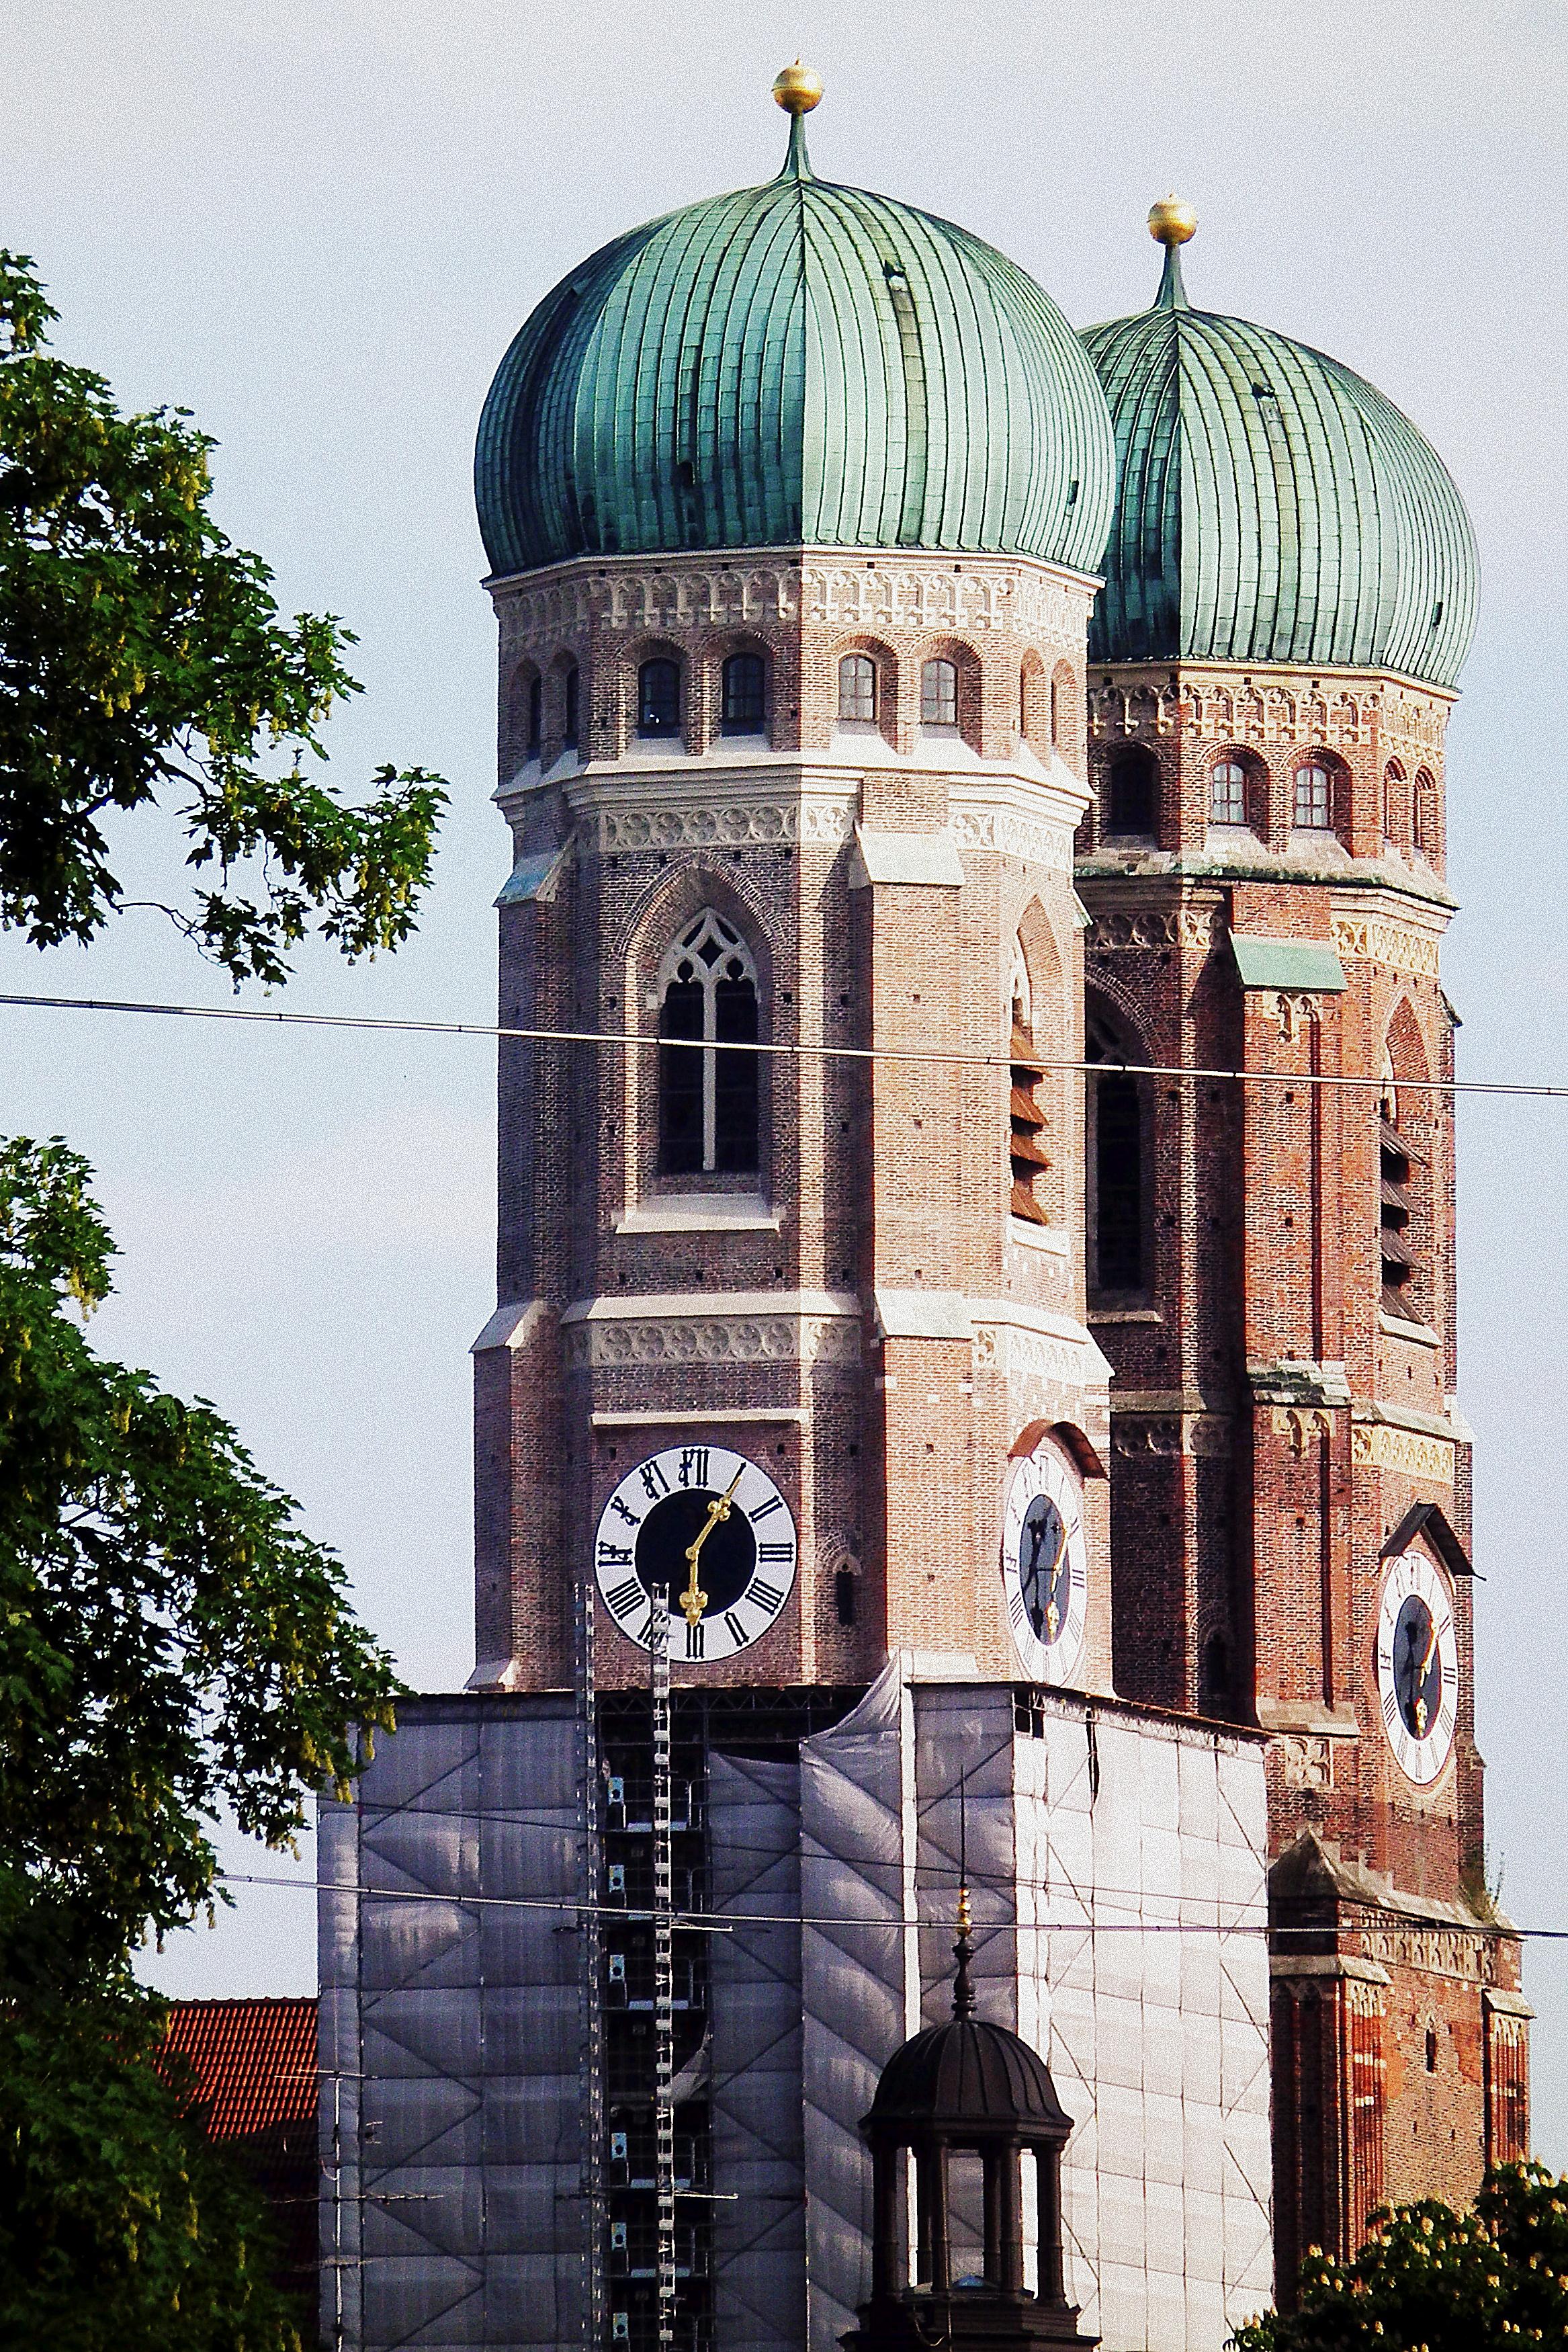 Cover image of this place Frauenkirche